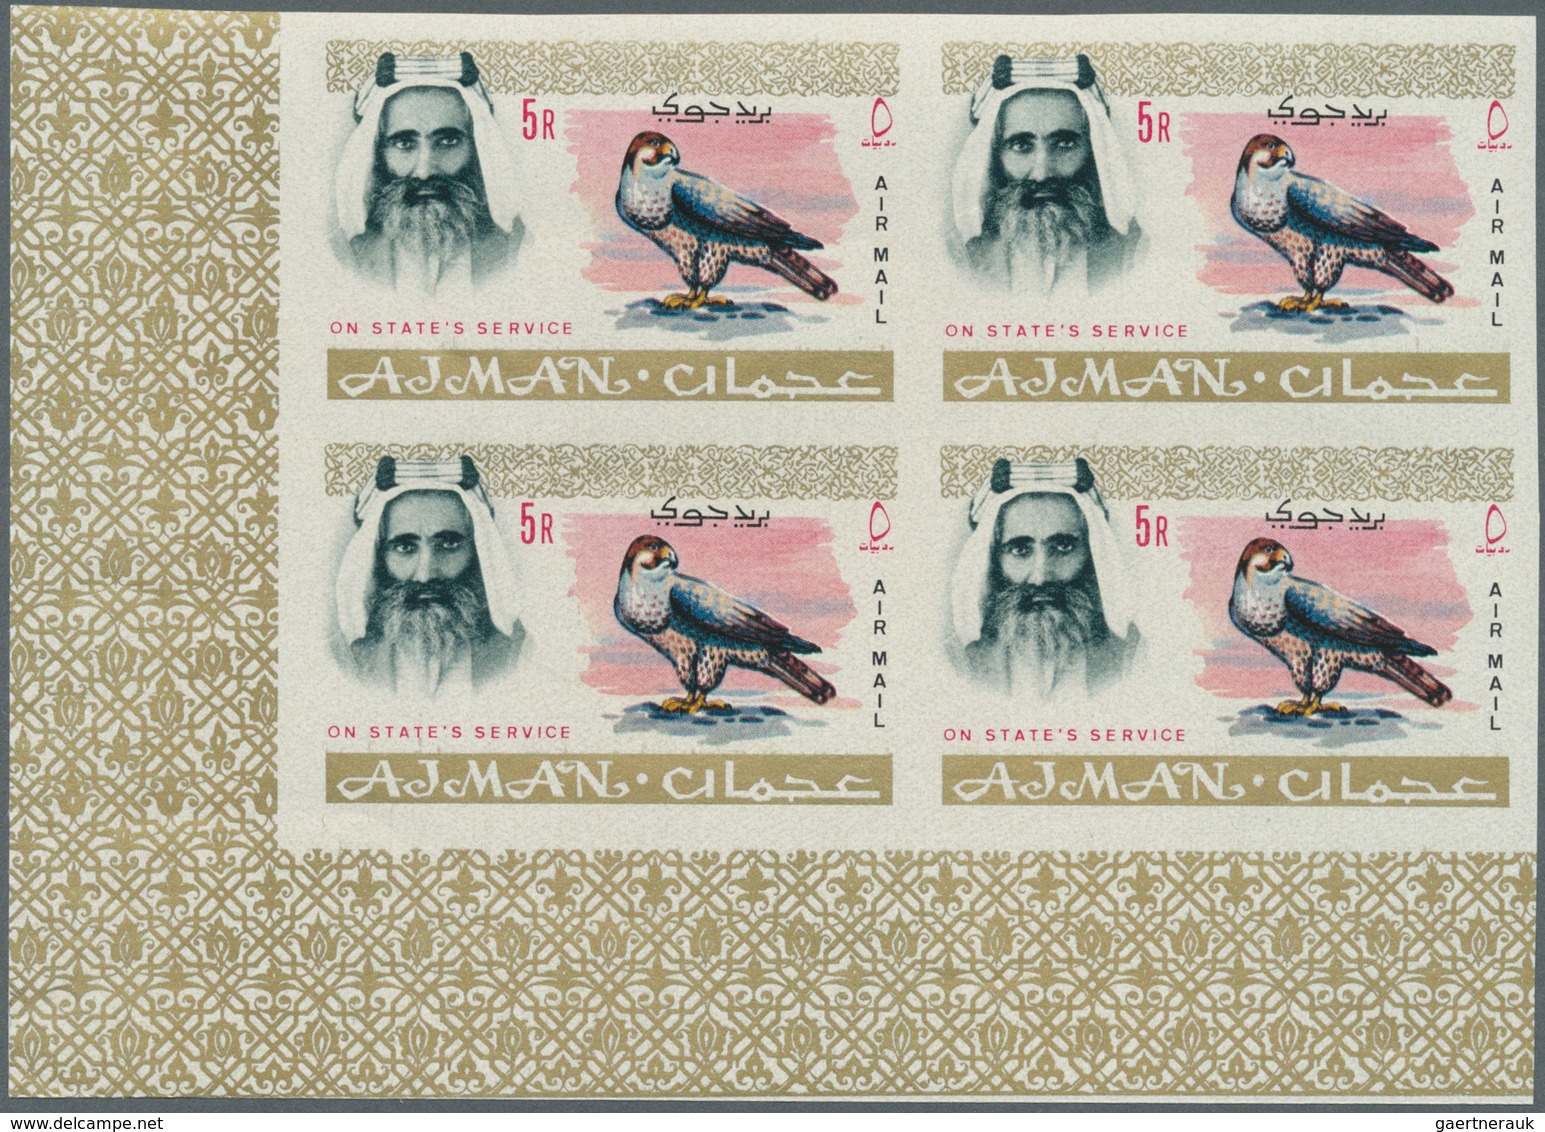 Adschman / Ajman: 1964/1971 (ca.), accumulation with approx. 5.800 IMPERFORATE stamps incl. definiti